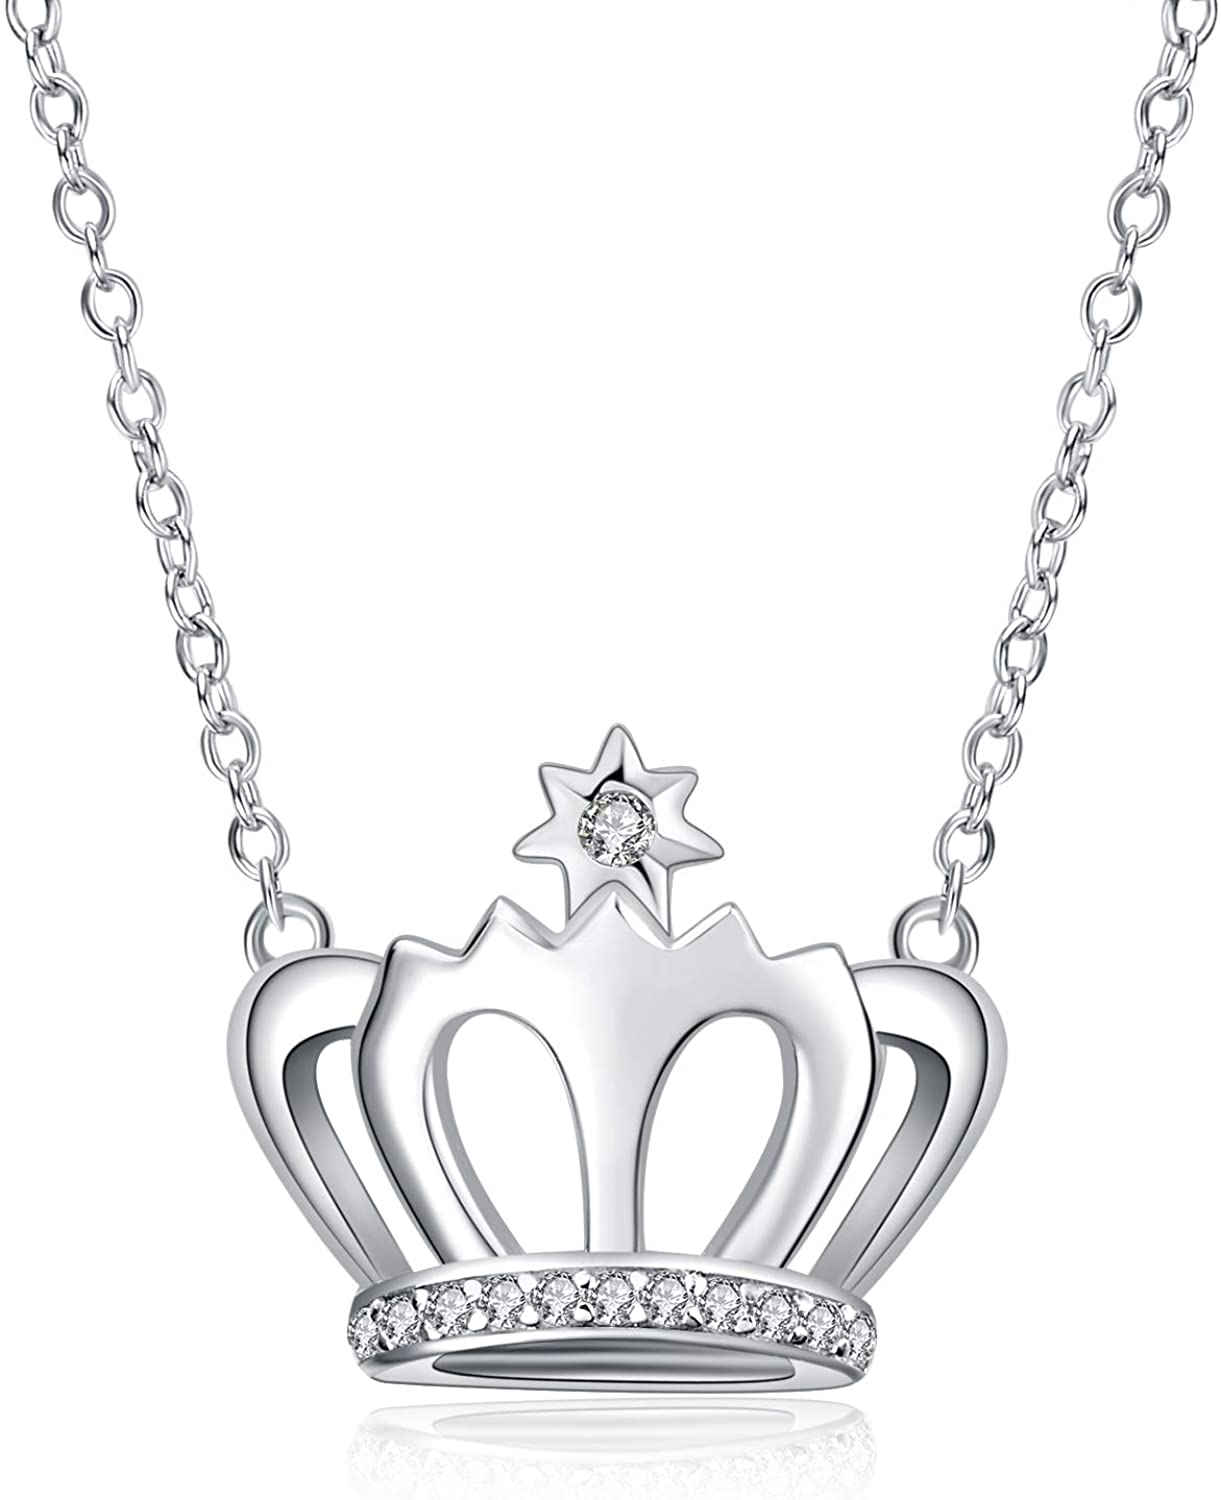 Crown choker necklace Sterling Silver Dainty Choker Pendant Necklace Jewelry Gifts for Women Girls